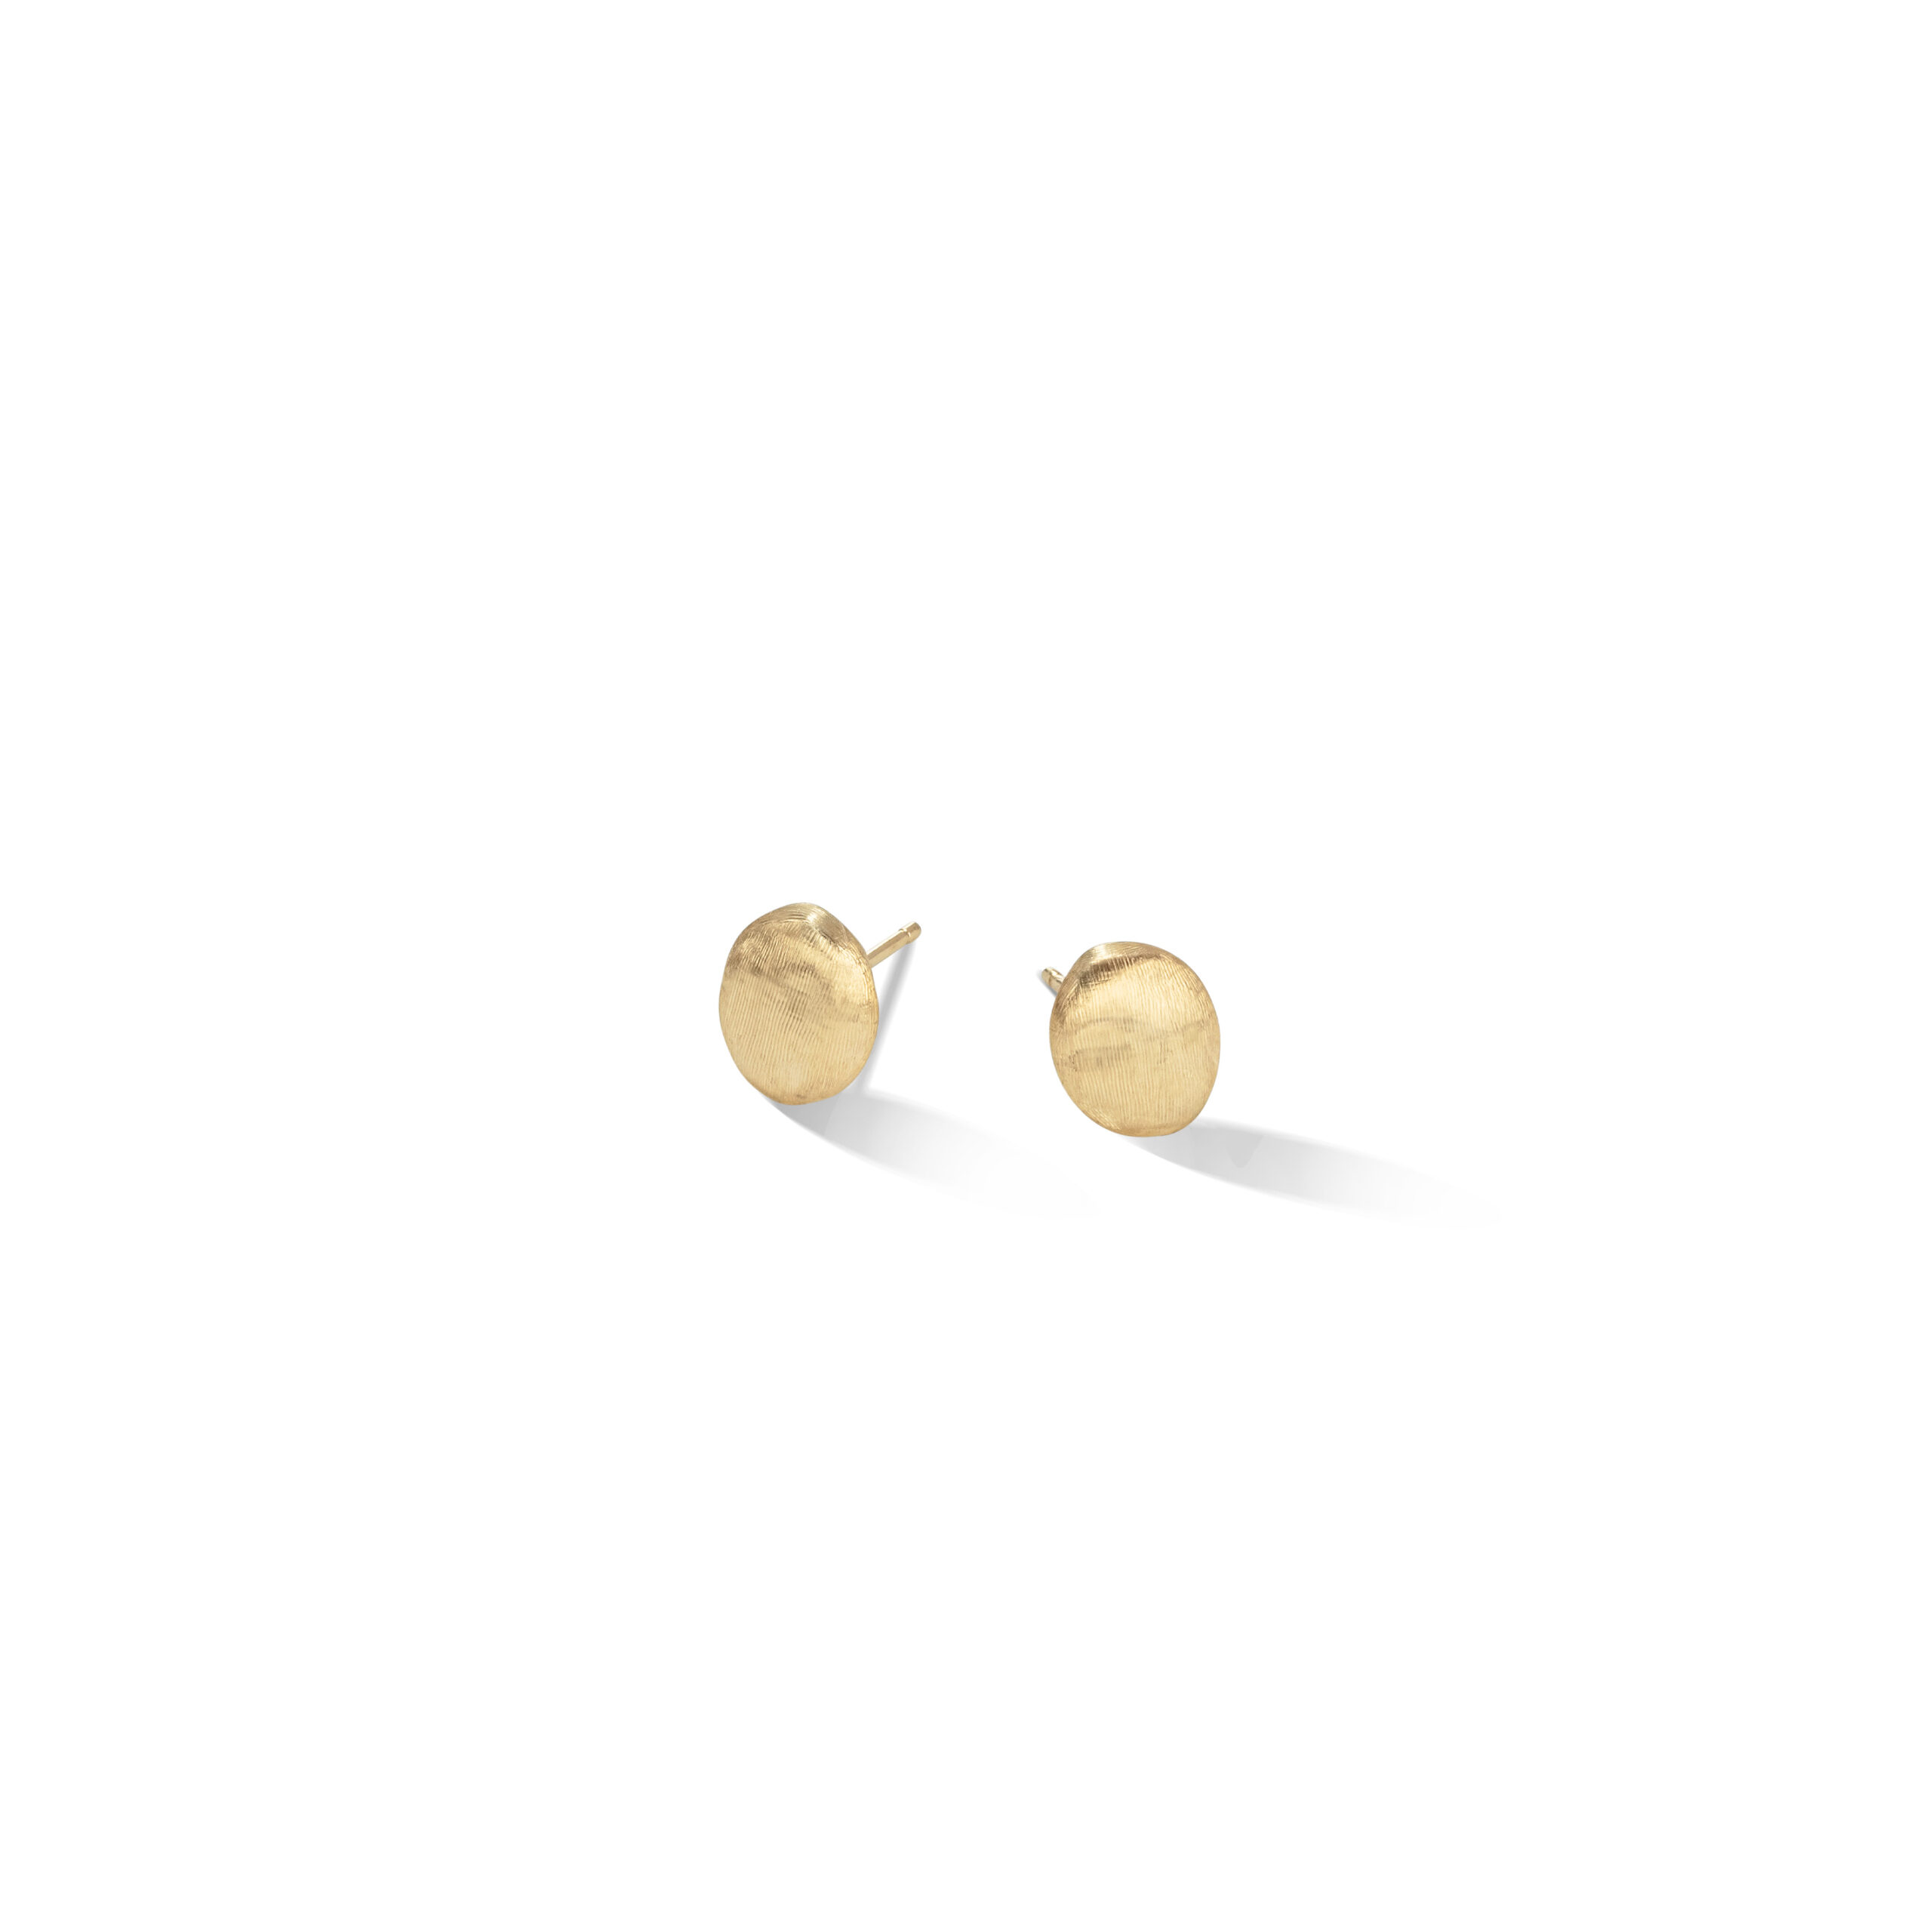 OB620 Y 02Marco Bicego Siviglia Collection 18k Yellow Gold Stud Earrings